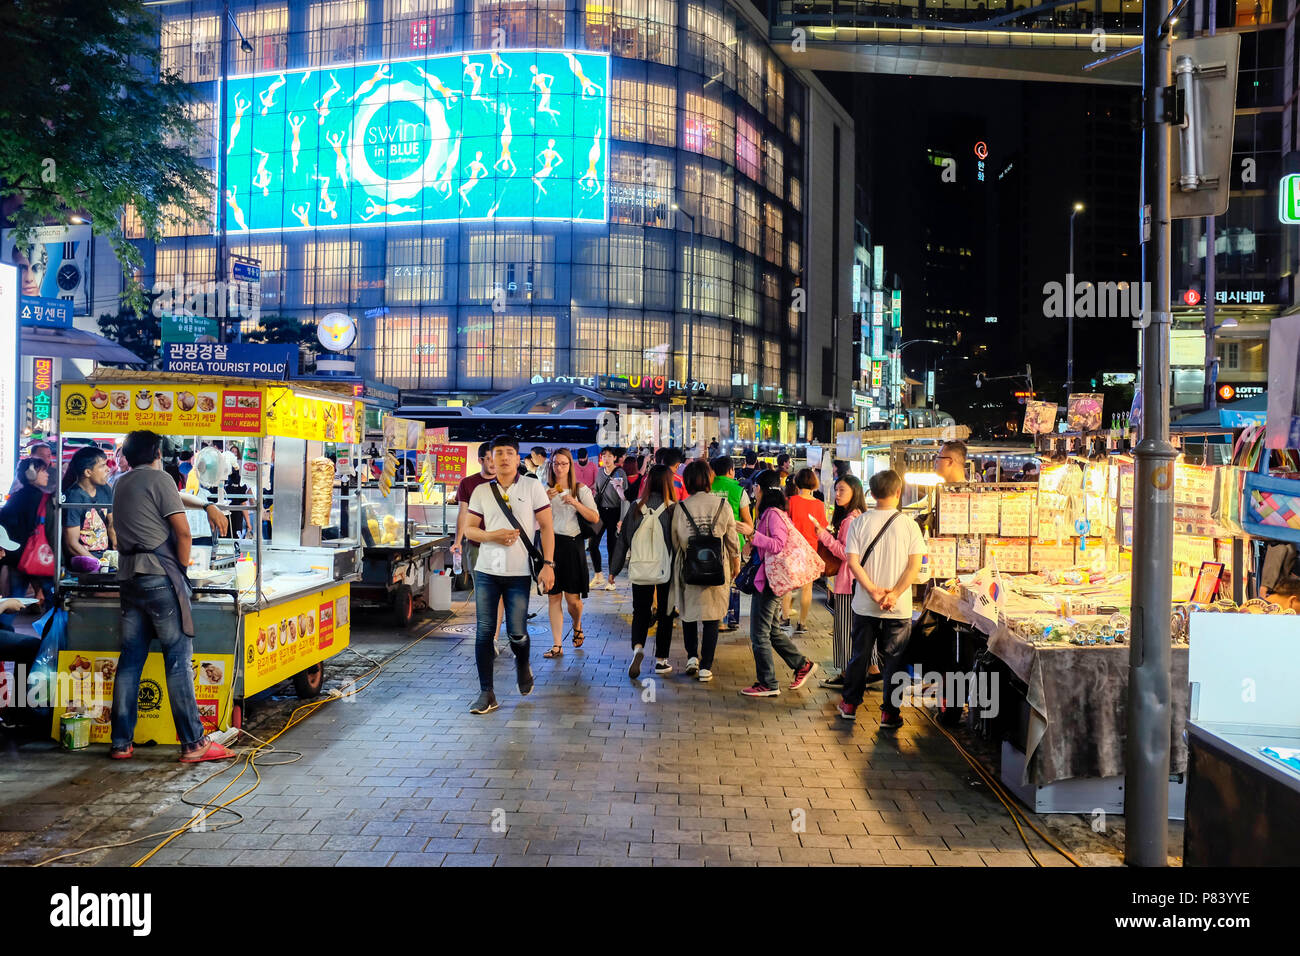 Street food stalls selling snacks and foods in the evenings to shoppers in Myeongdong Shopping district, Myeongdong, Seoul, Korea. Stock Photo